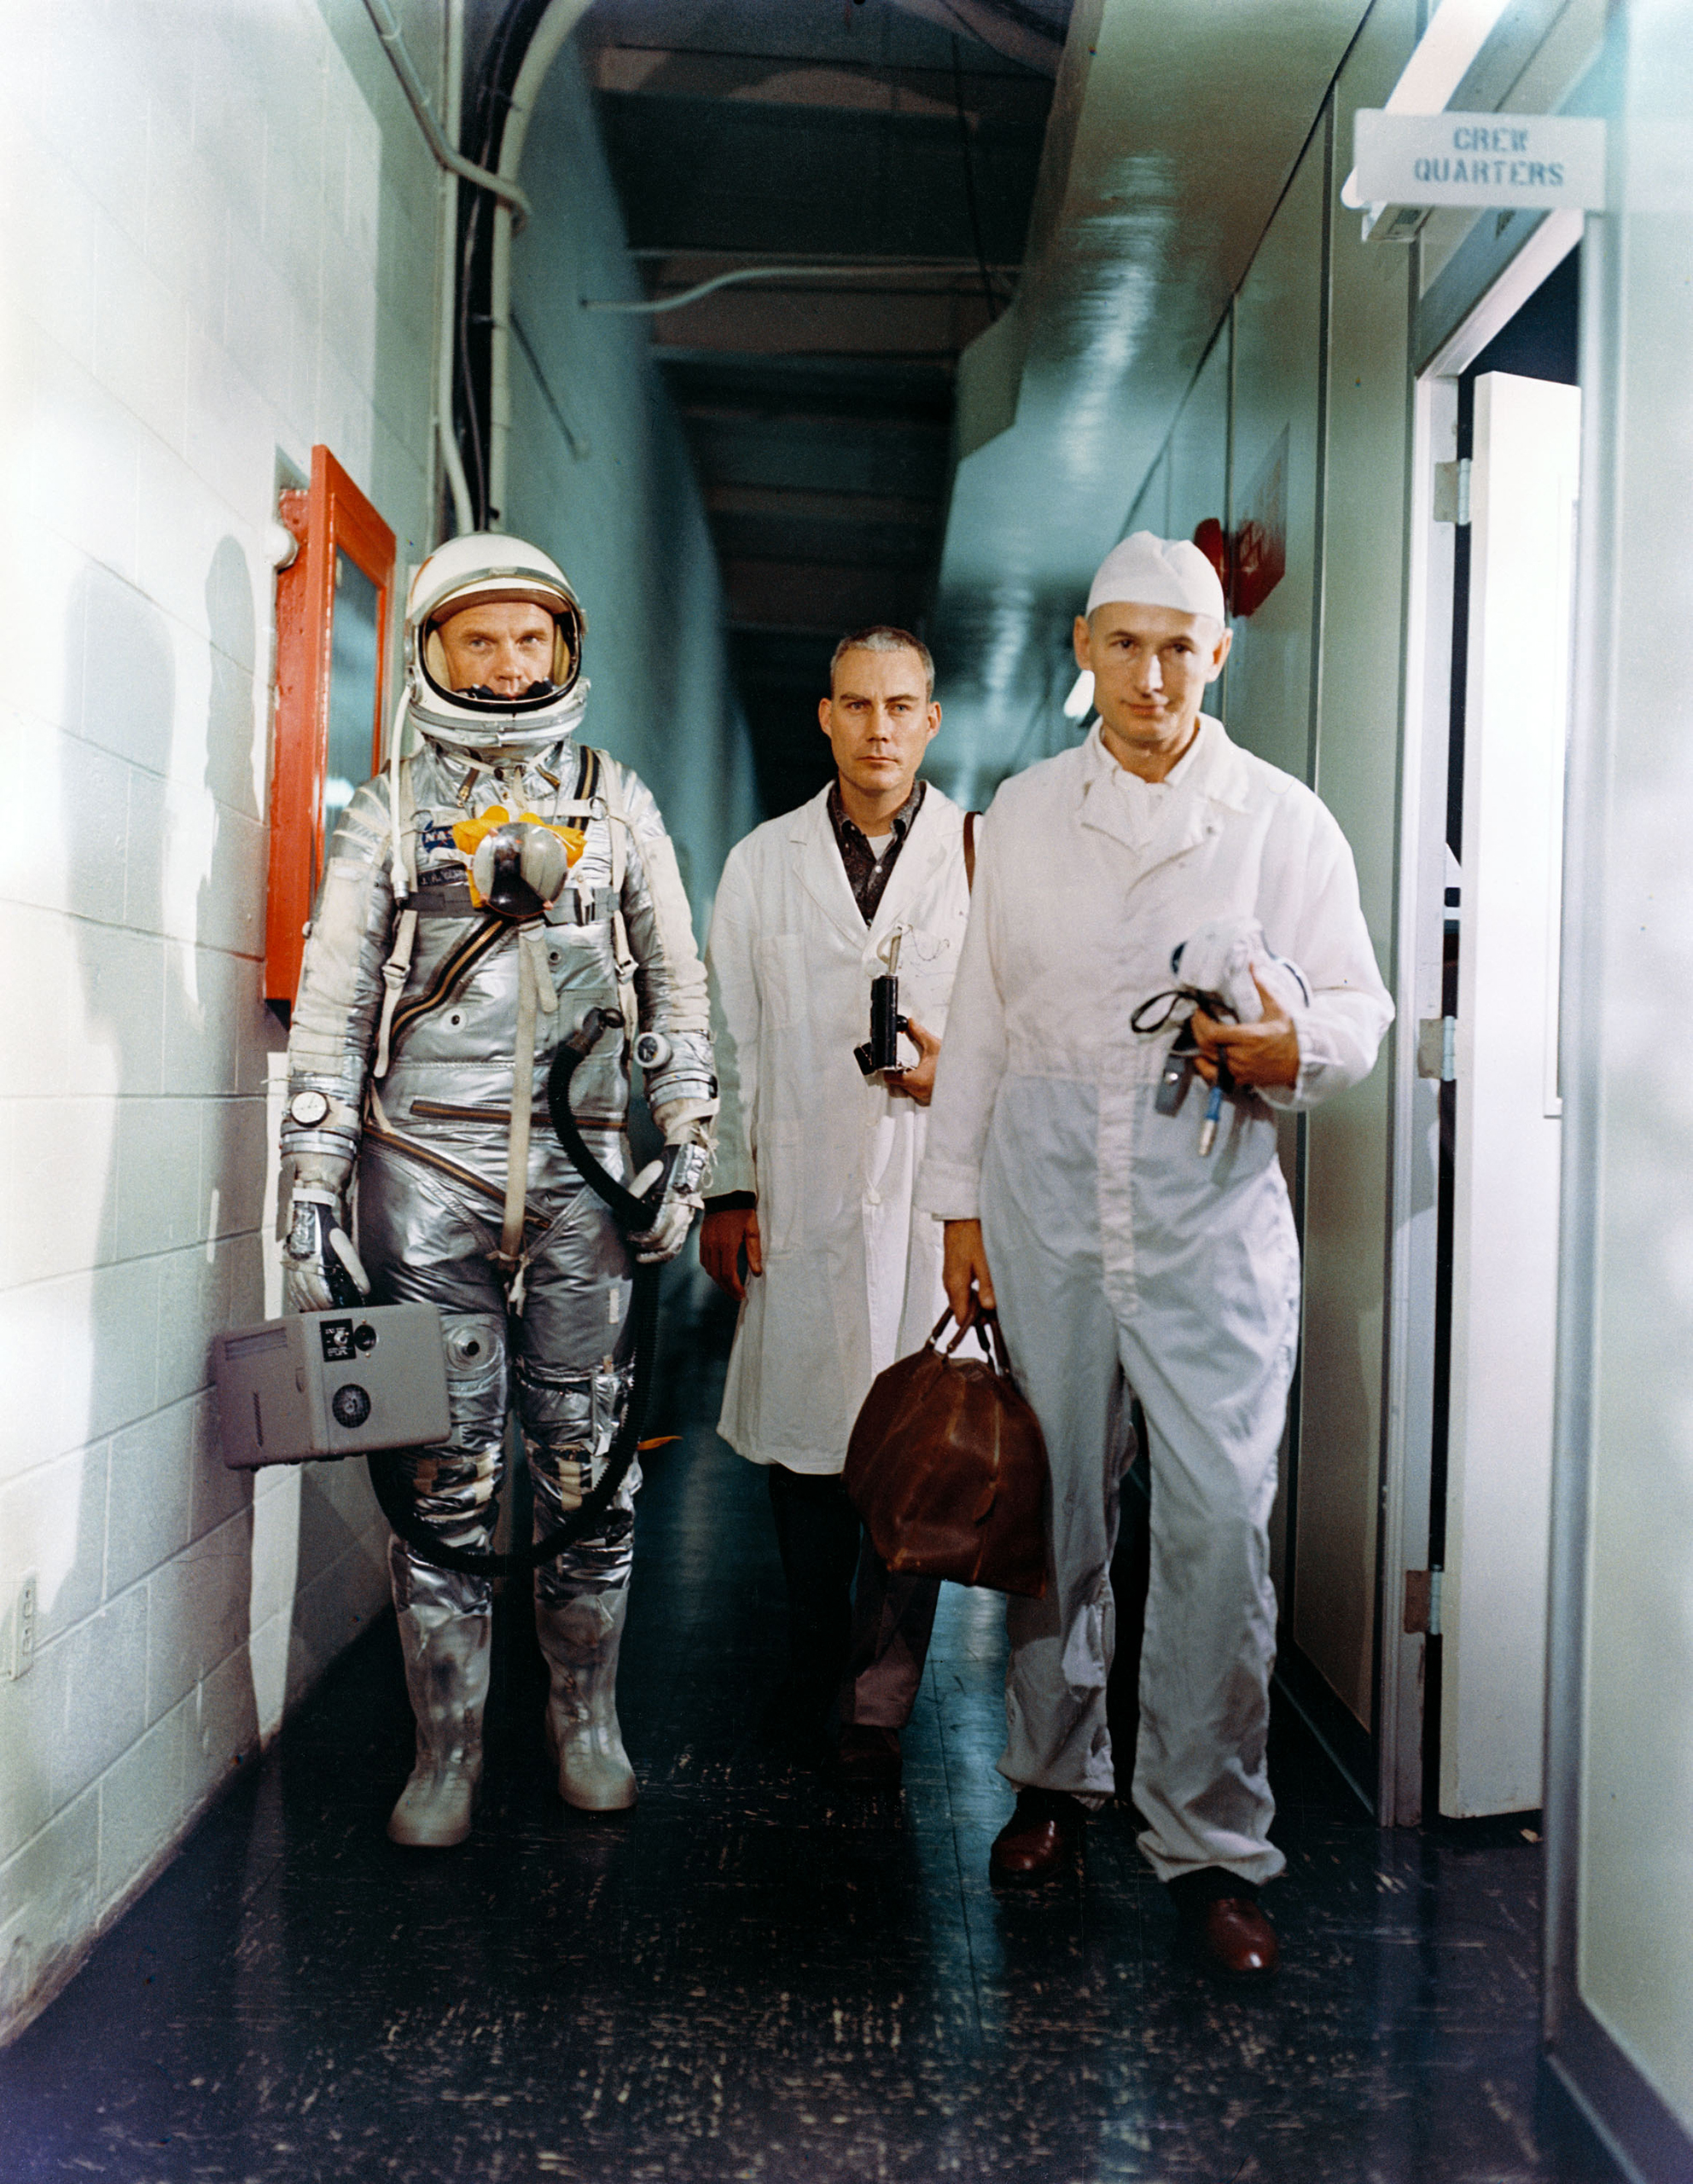 Suited Up Glenn's walk into history began in an unprepossessing hallway as he left the crew quarters on the morning of his Feb. 20, 1962, launch in the company of a flight surgeon and an equipment specialist.